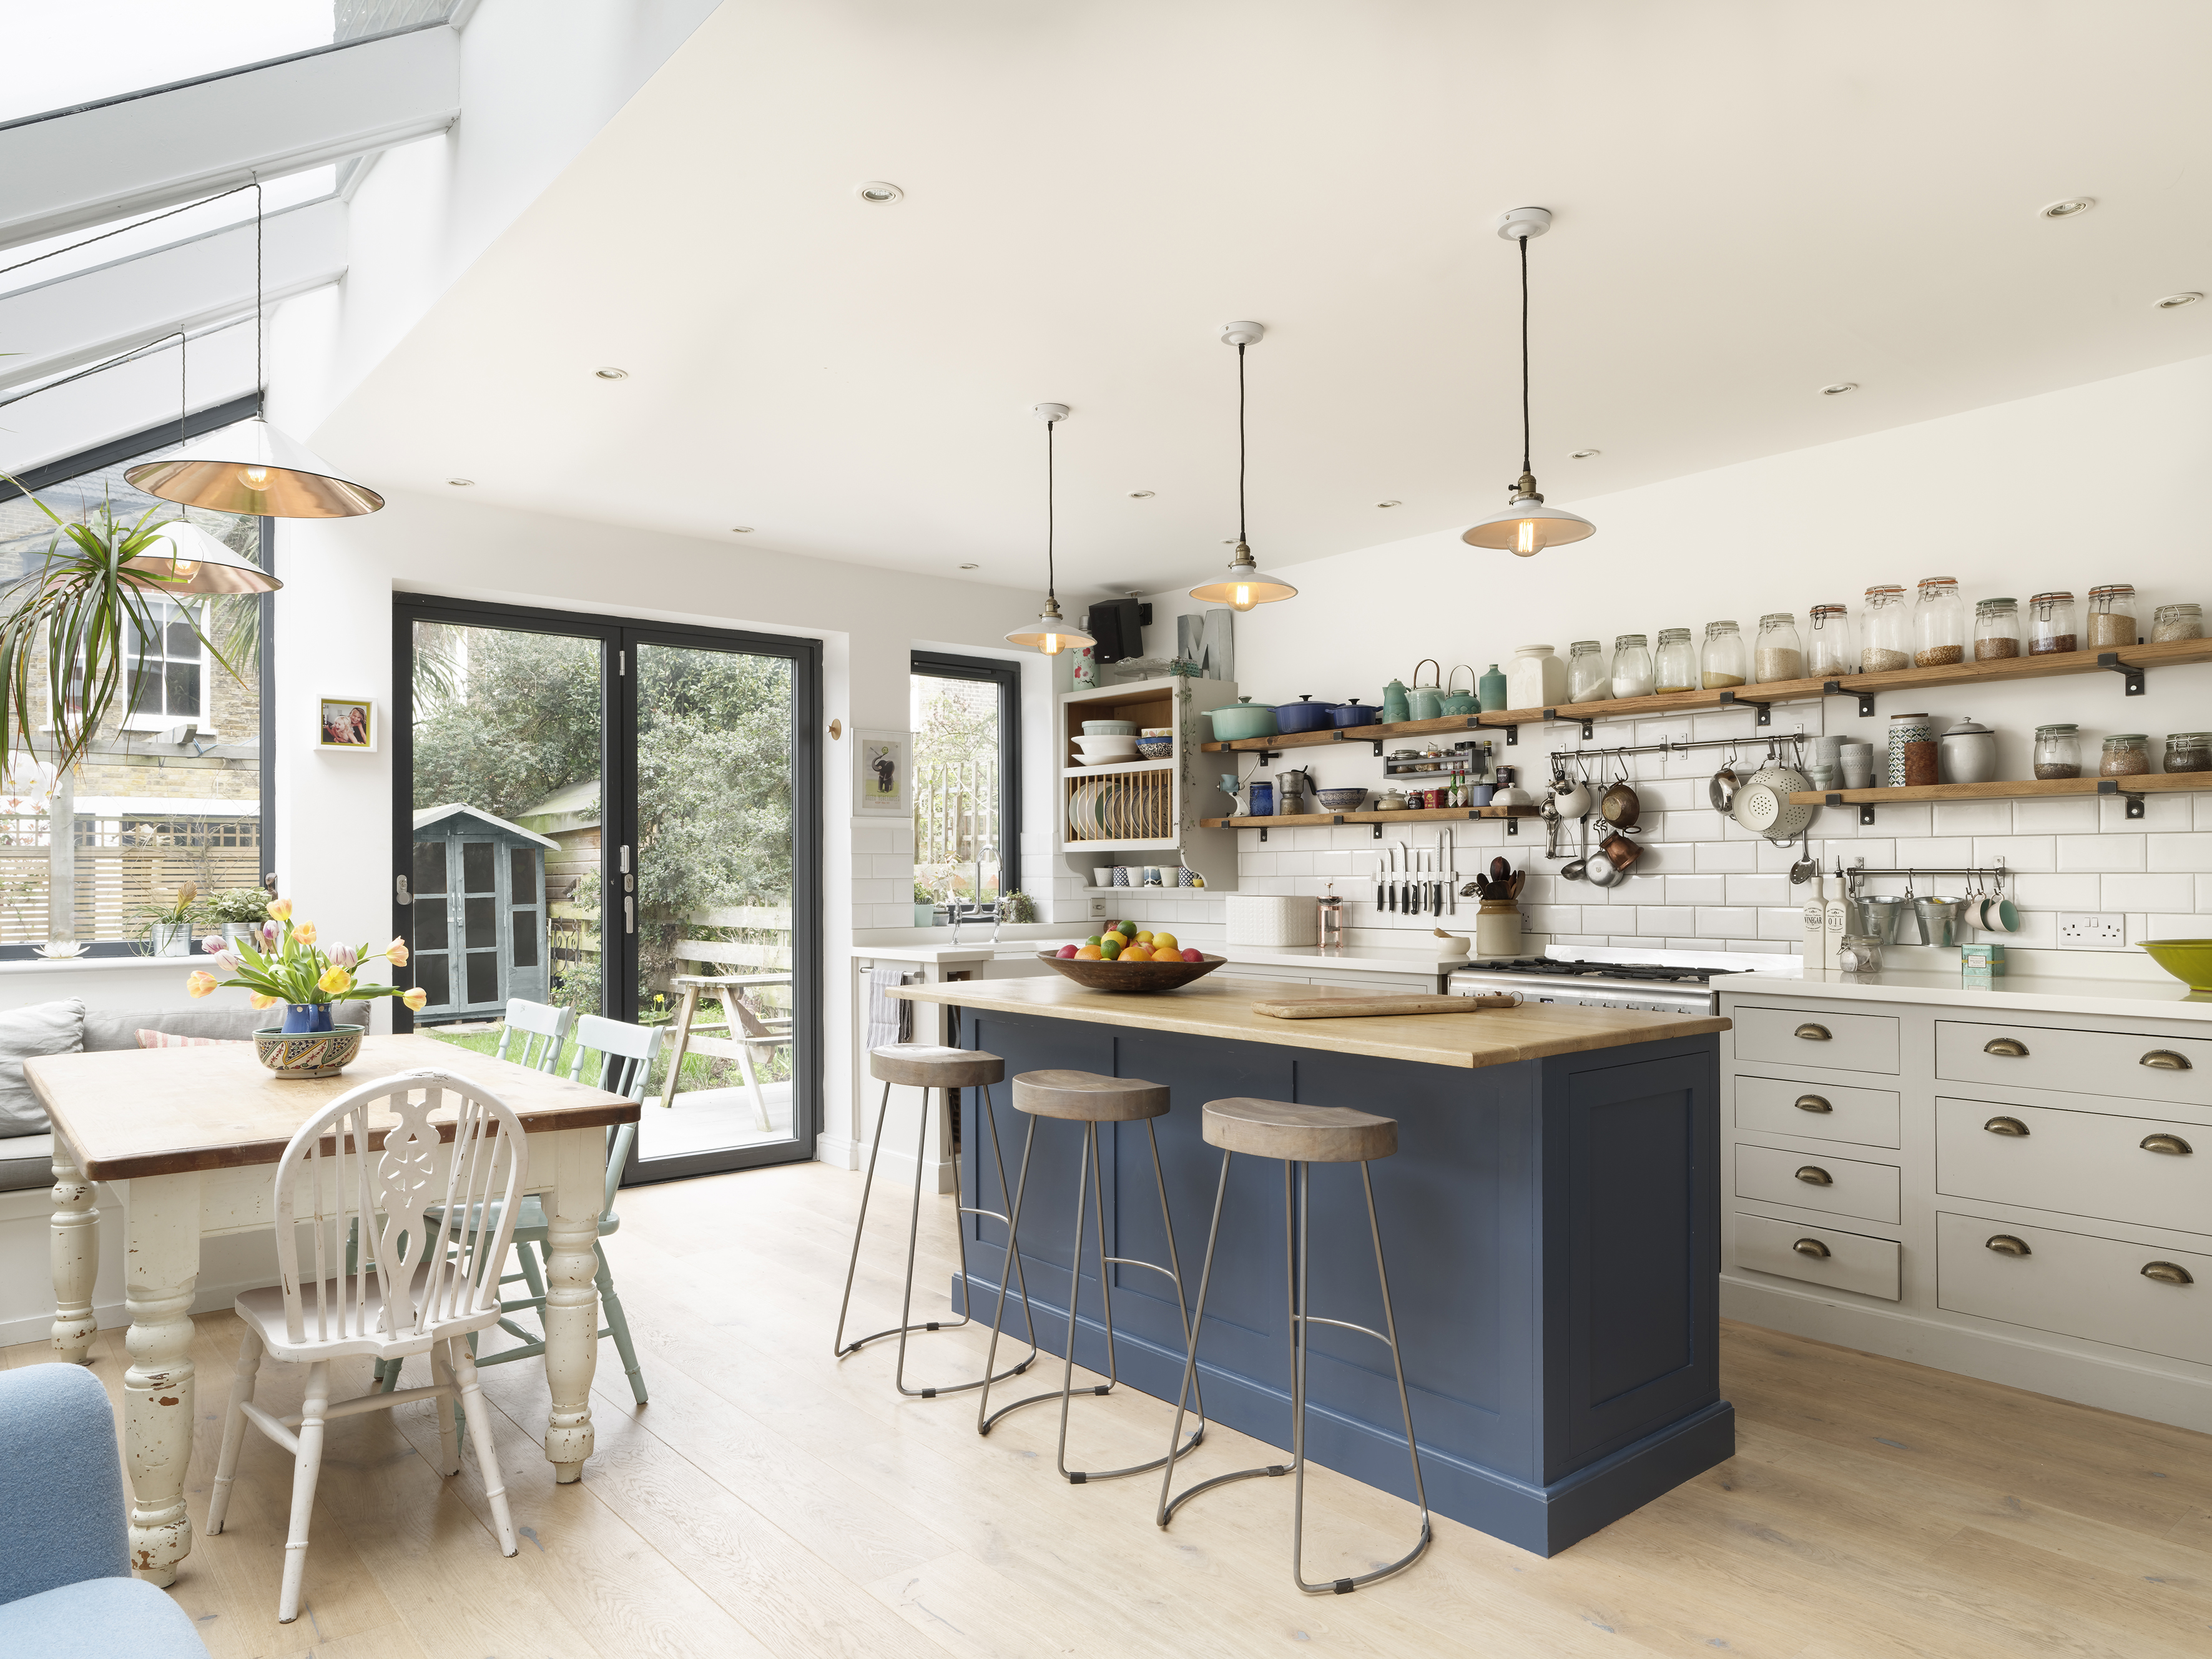 </p> <p>Find your ideal home design pro on designfor-me.com - get matched and see who's interested in your home project. Click image to see more inspiration from our design pros</p> <p>Design by Jennie & Chi, interior designer from Islington, London</p> <p> #interiordesign #interiors #homedecor #homeinspiration #kitchens #kitchendesign #kitcheninspiration #kitchenideas #kitchengoals #extensions #extensiondesign #extensioninspiration #extensionideas #houseextension #sideextensions #sidereturn #sideextensionideas #skylights #rooflights </p> <p>